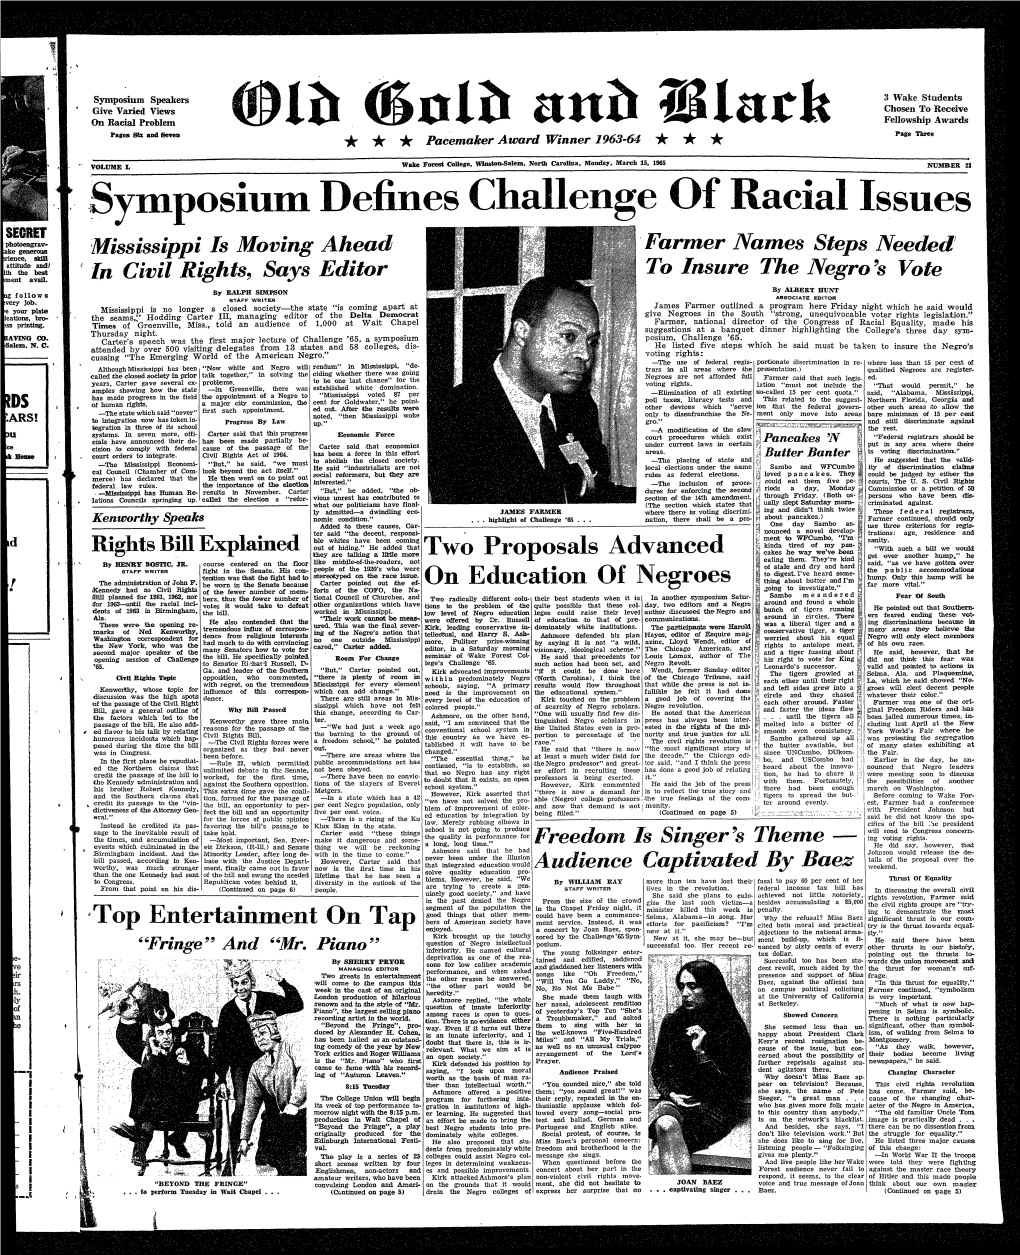 Symposium Defines Challenge of Racial Issues Mississippi Is Moving Ahead Farmer Names Steps Nee;Ded! in Civil Rights, Says Editor to Insure the Negro's Vote